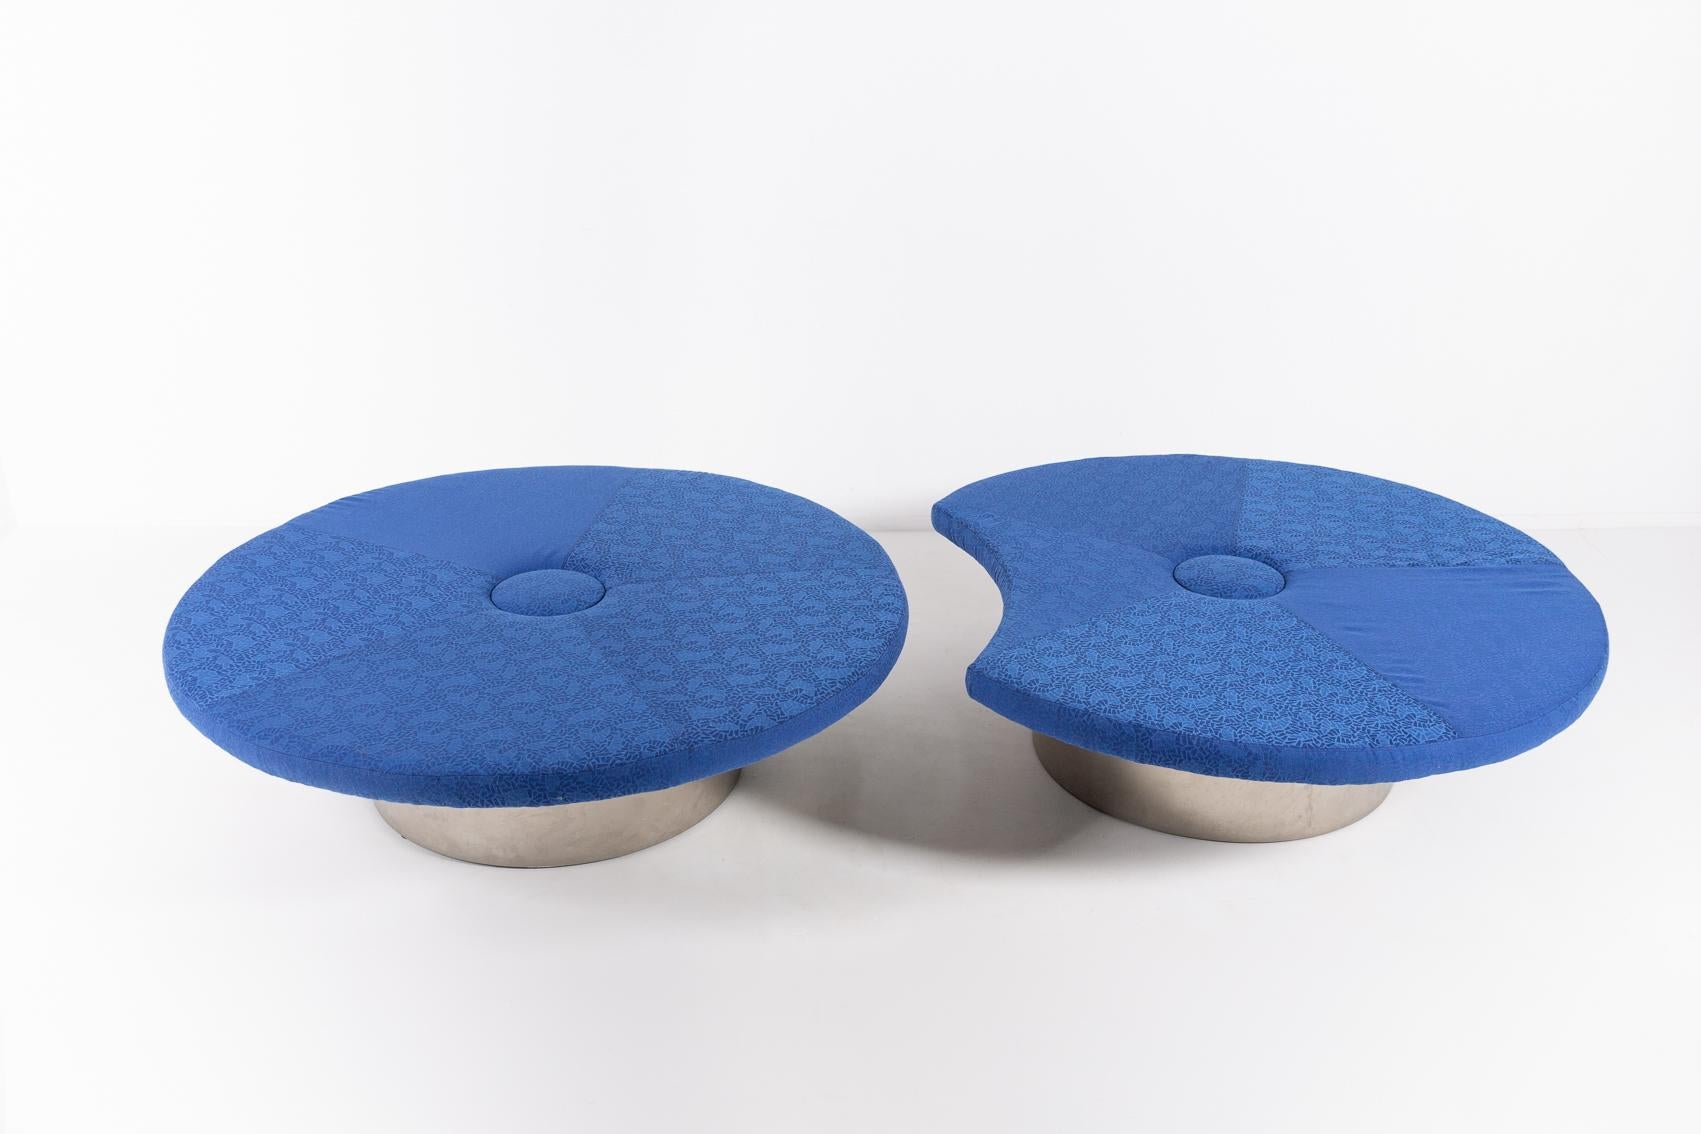 Two piece organically shaped seating islands ‘Waterlily’ from Troels Grum-Schwensen. Upholstered in blue cotton fabric, mounted on a stainless steel base. Made for Globe Zero 4. In height adjustable.

Condition
Good, later